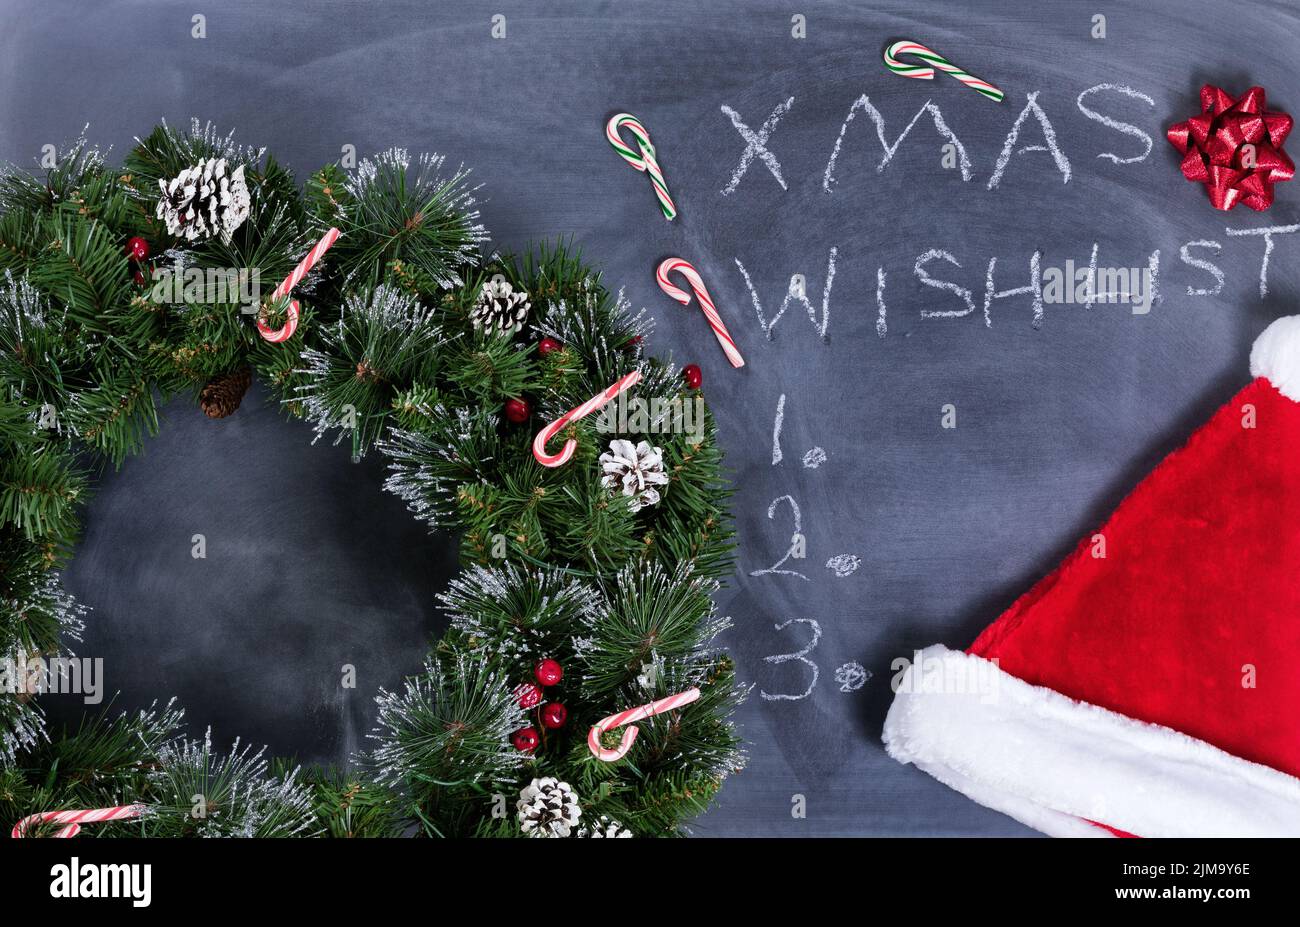 Erased black chalkboard with wreath and other Xmas items plus text writing Stock Photo